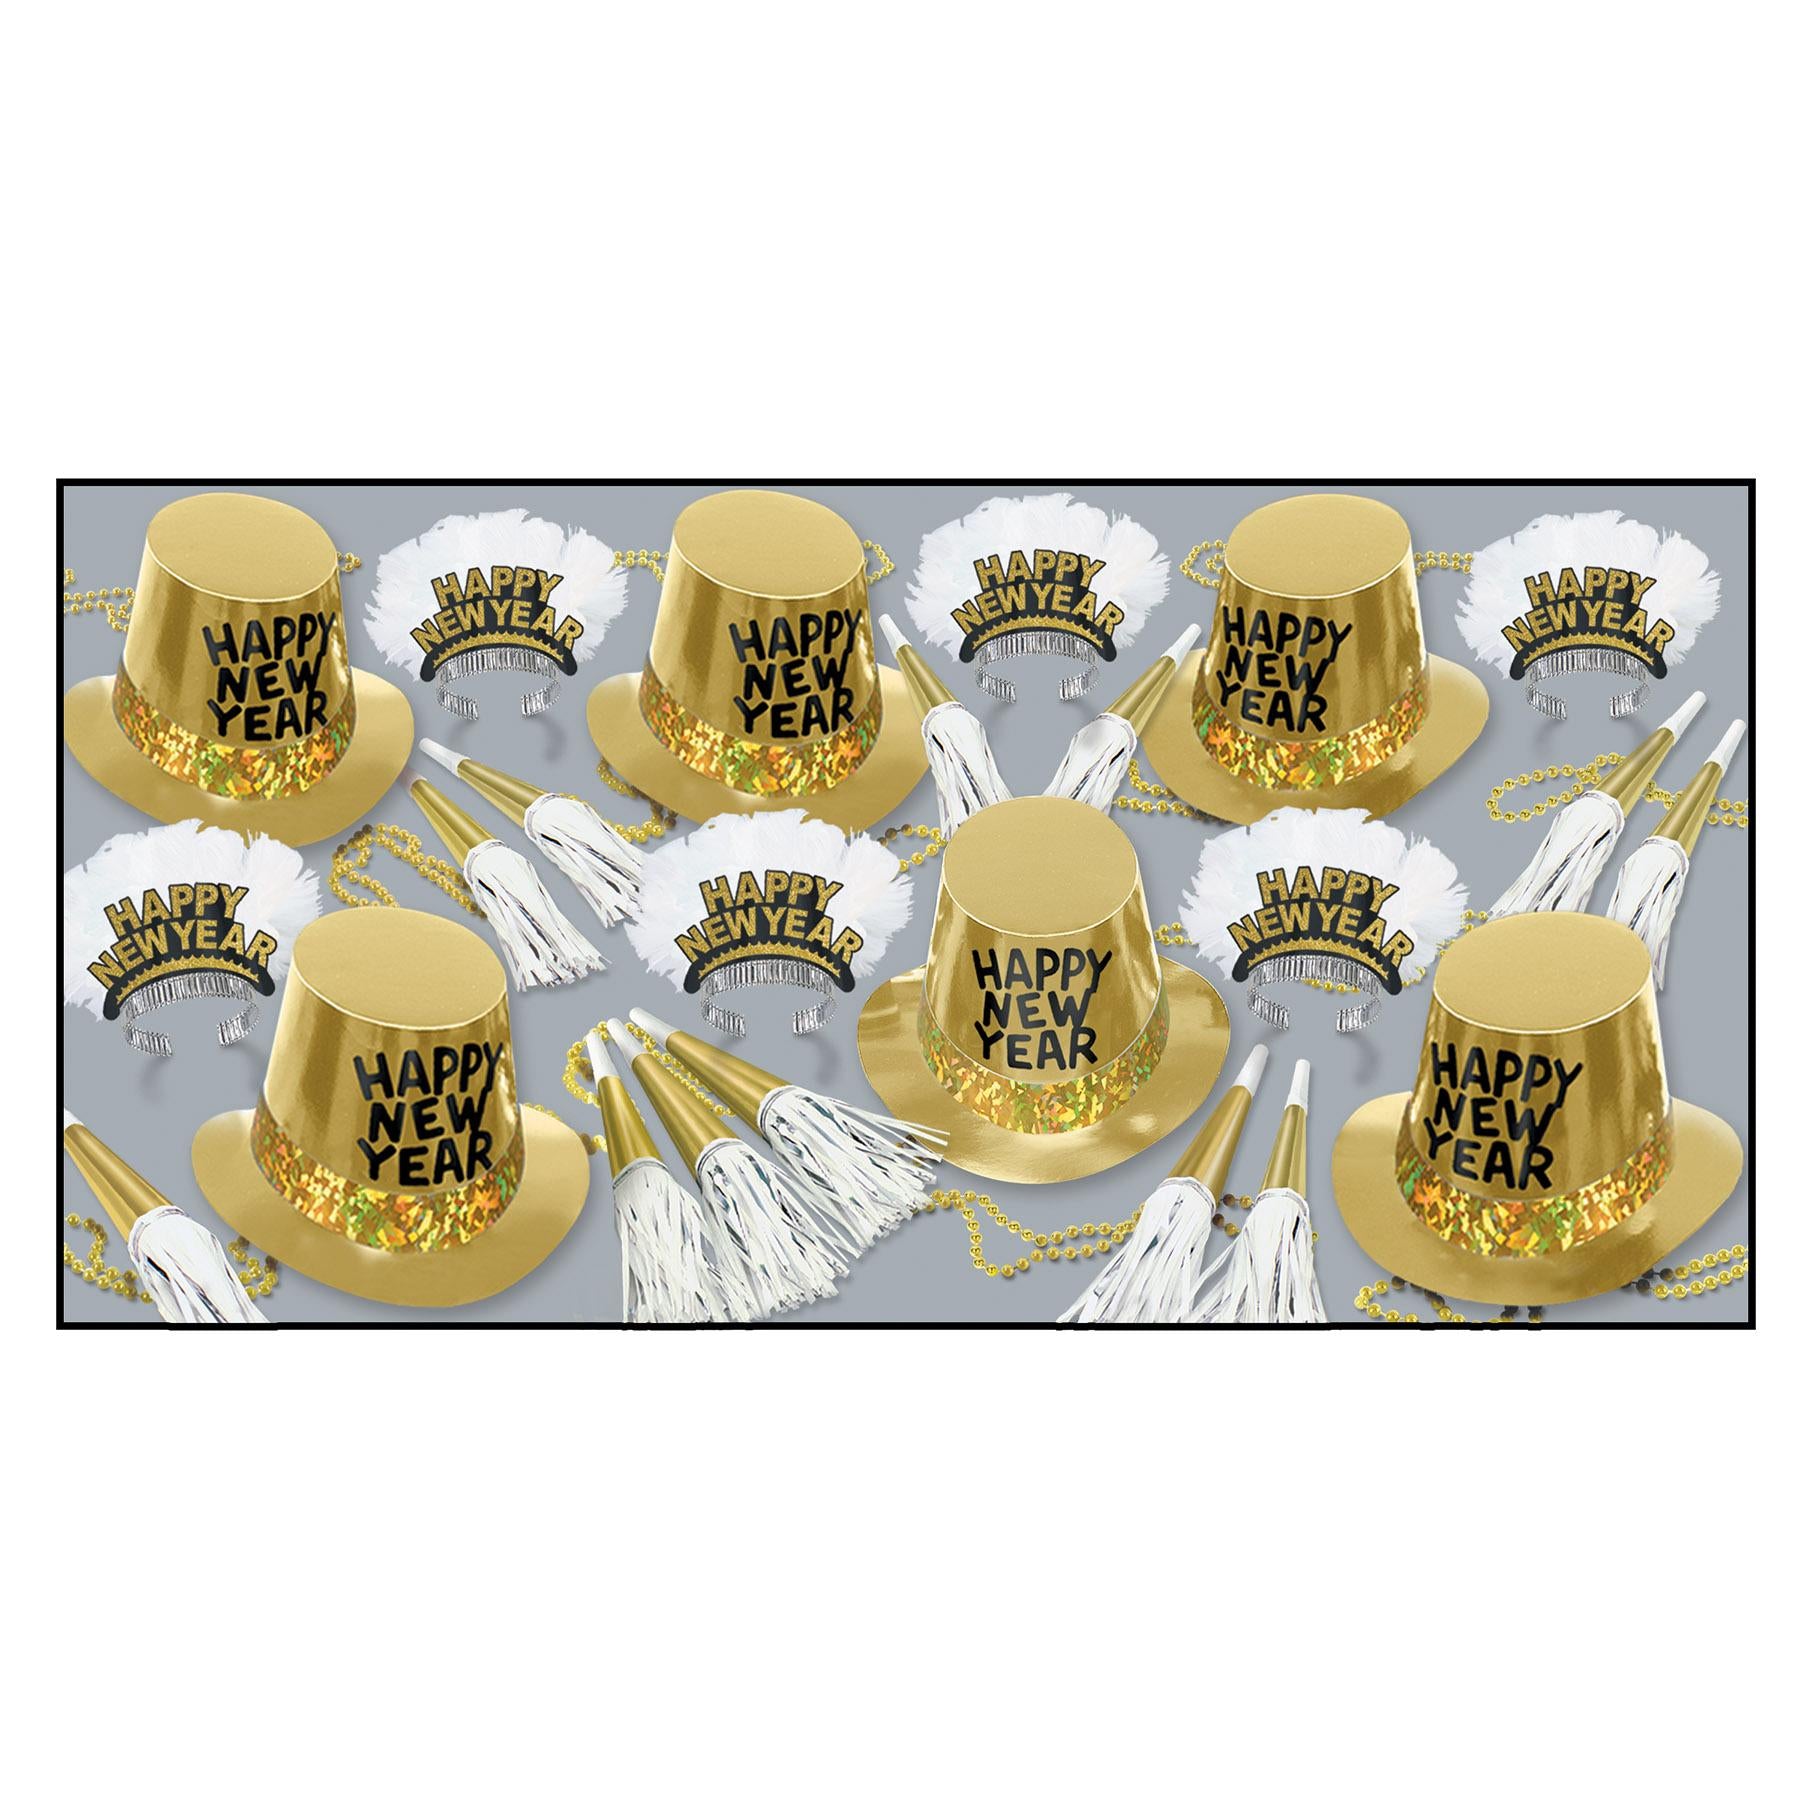 Beistle Gold Rush Party Kit for 25 People